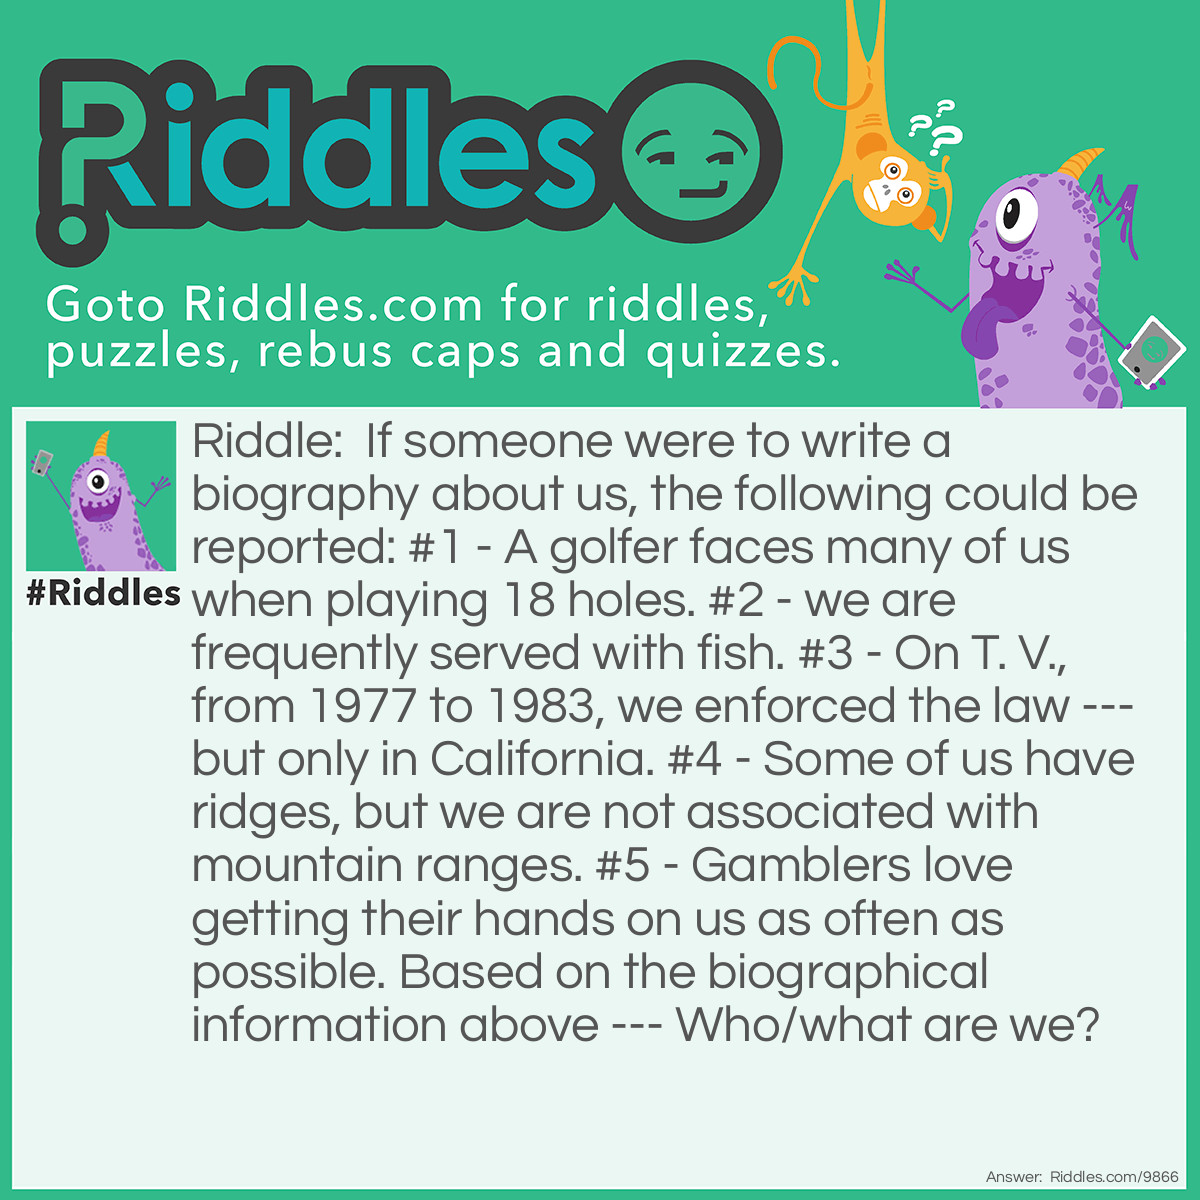 Riddle: If someone were to write a biography about us, the following could be reported: #1 - A golfer faces many of us when playing 18 holes. #2 - we are frequently served with fish. #3 - On T. V., from 1977 to 1983, we enforced the law --- but only in California. #4 - Some of us have ridges, but we are not associated with mountain ranges. #5 - Gamblers love getting their hands on us as often as possible. Based on the biographical information above --- Who/what are we? Answer: The biography of Chips.